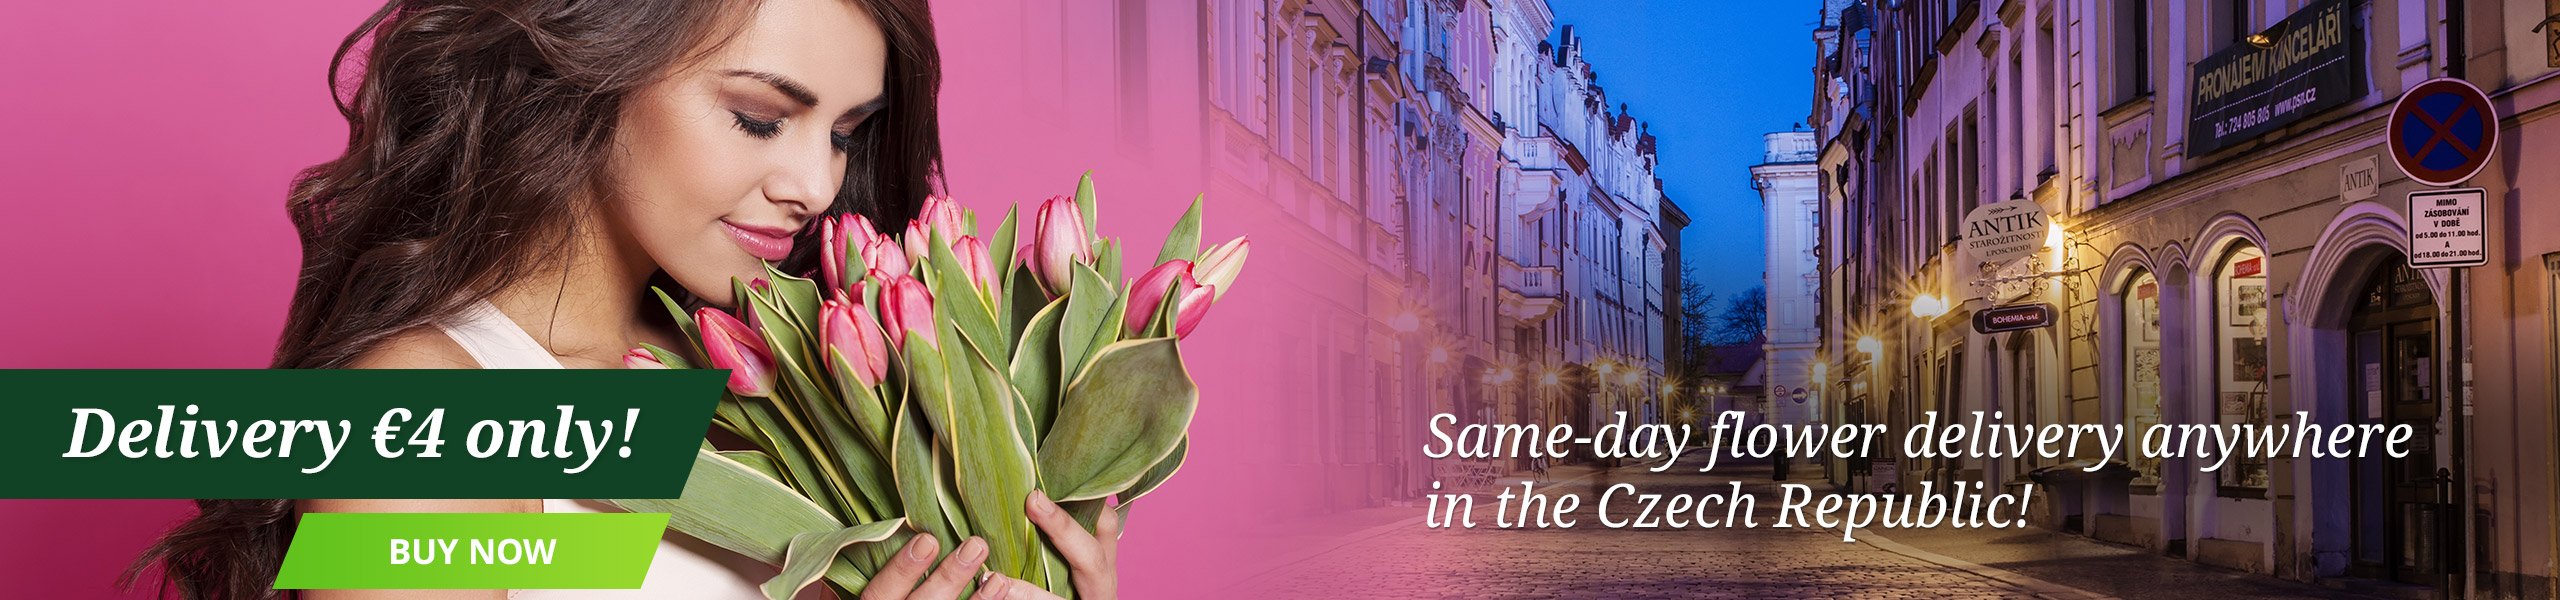 Same-day Flower Delivery anywhere in the Czech Republic